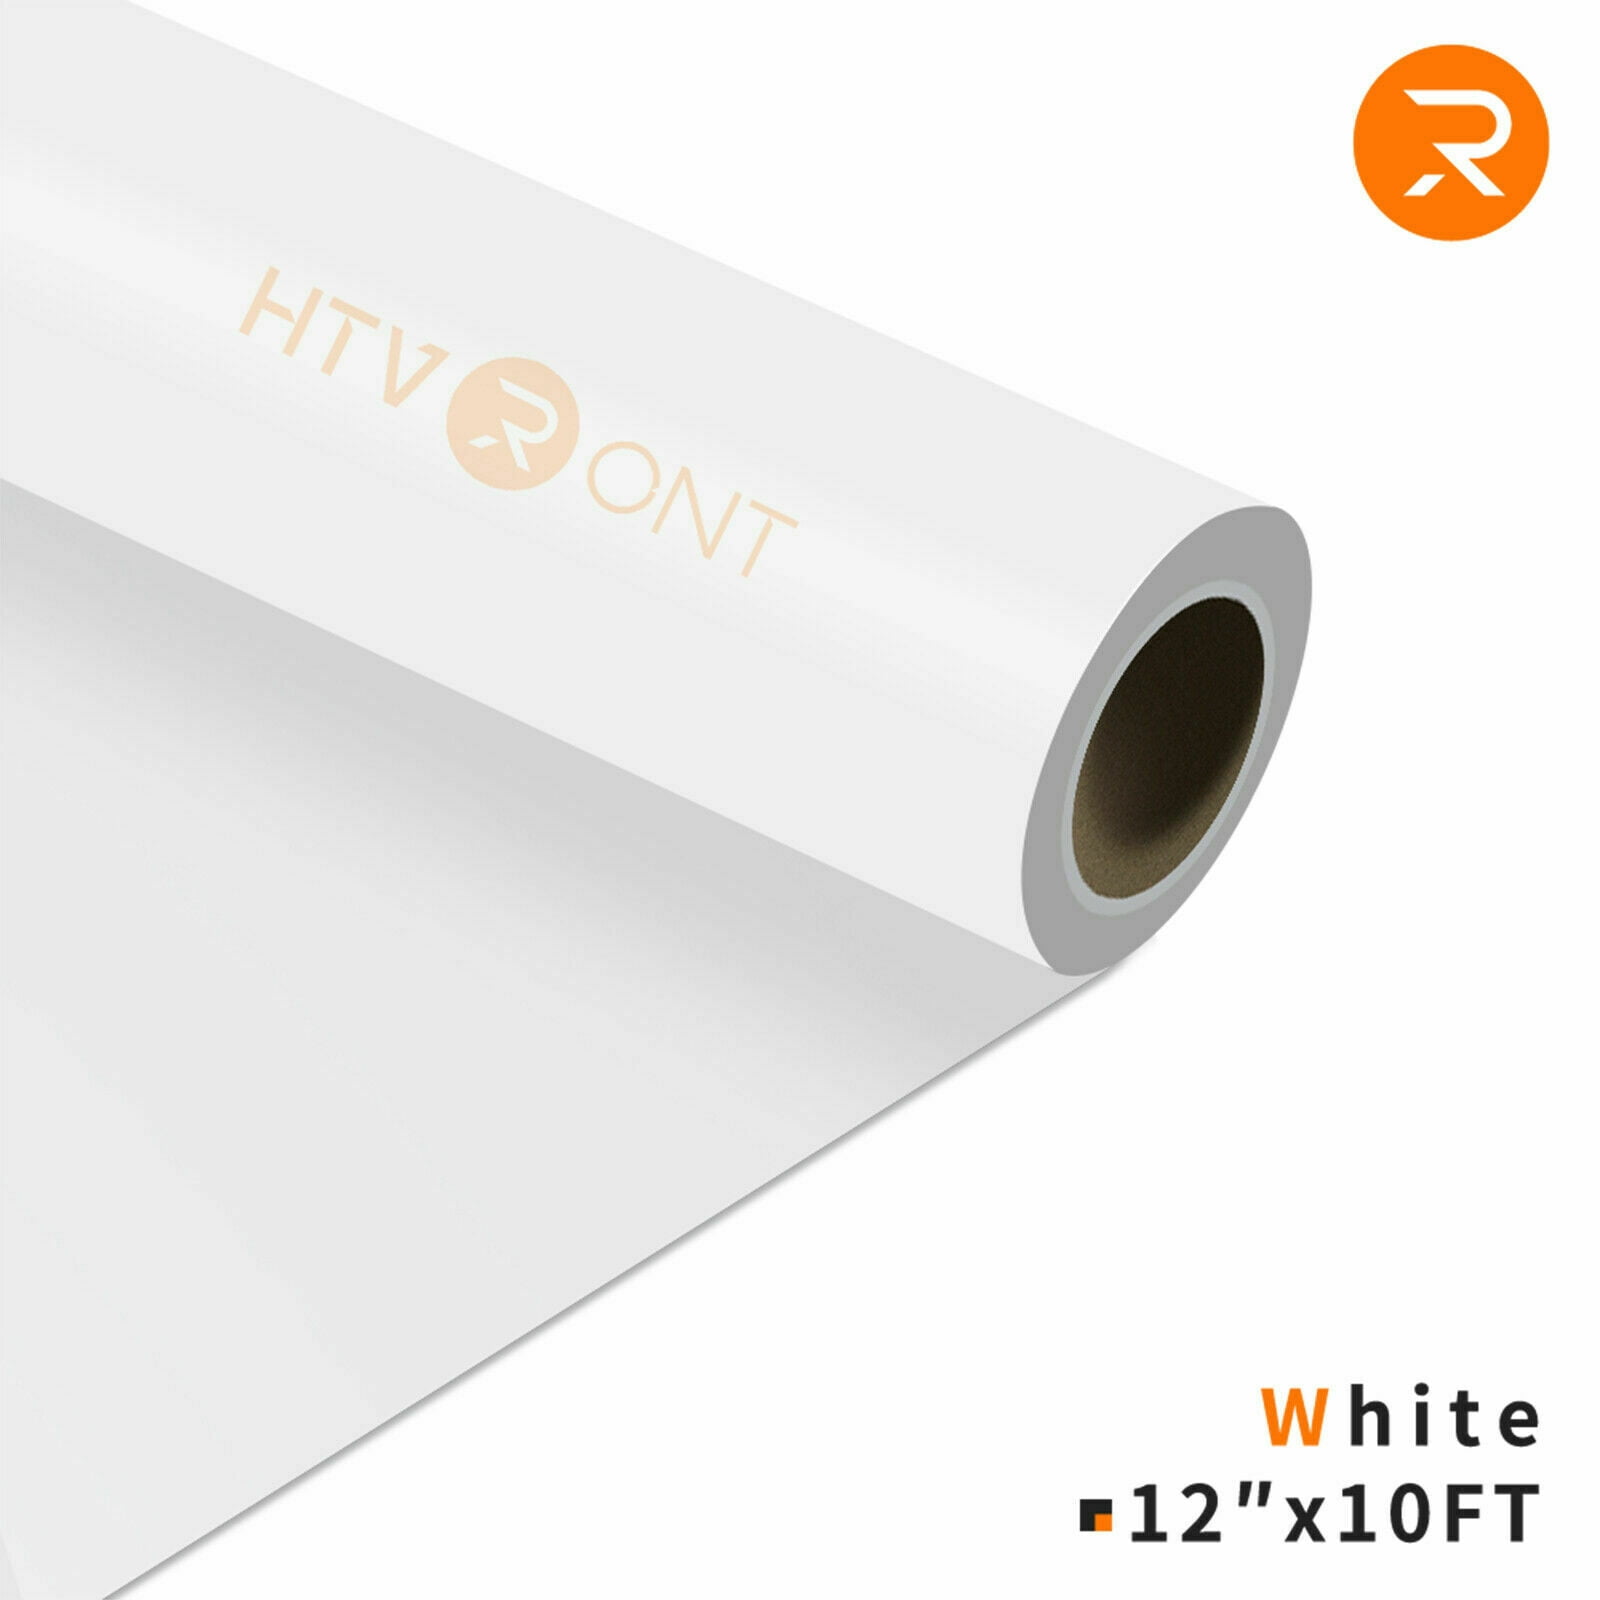 White Heat Transfer Vinyl Rolls - 12 x 10FT White Iron on Vinyl for  Shirts,White Iron on for Cricut & All Cutter Machine - Easy to Cut & Weed  for